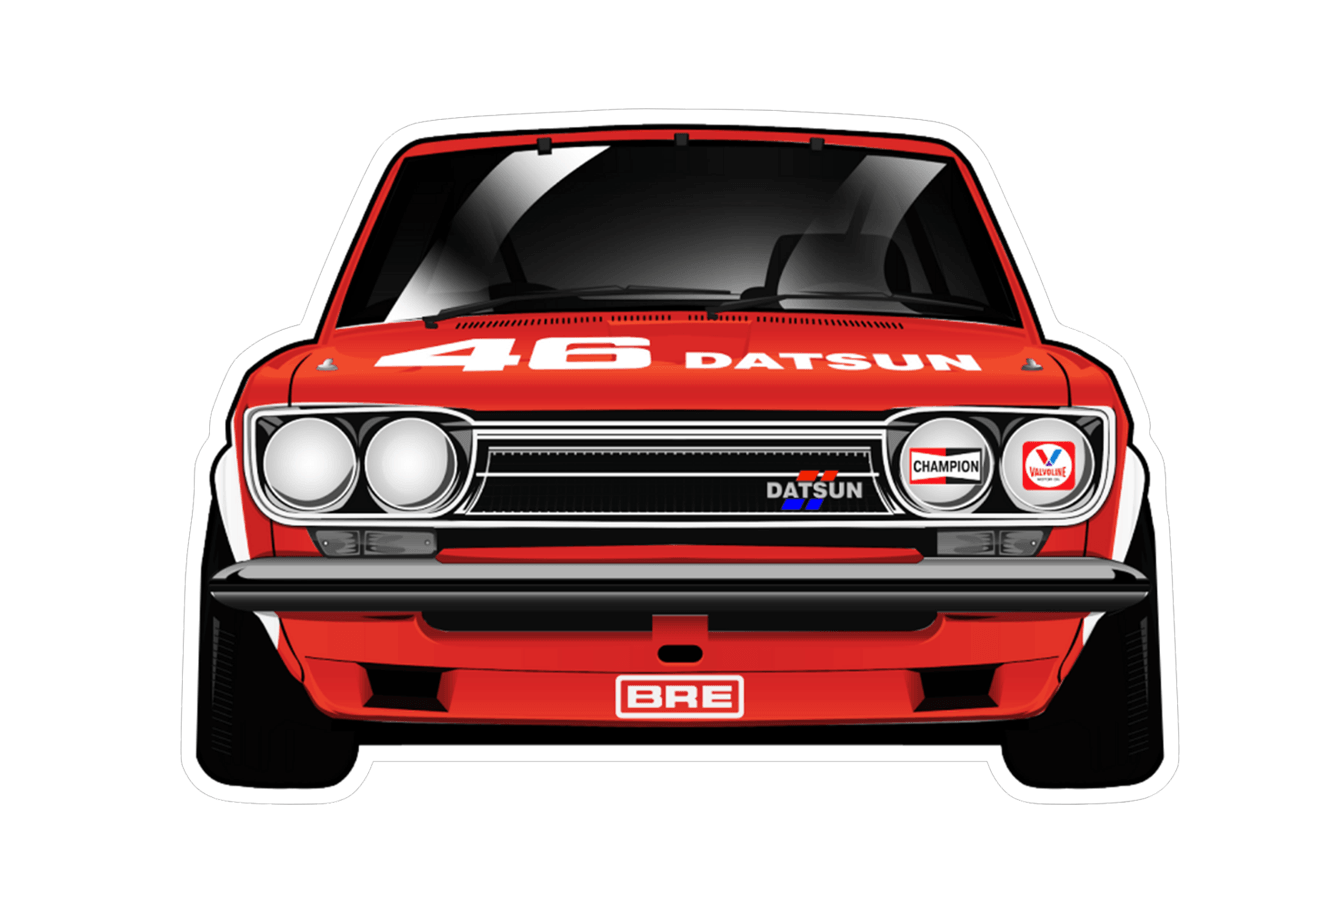 rally car decals